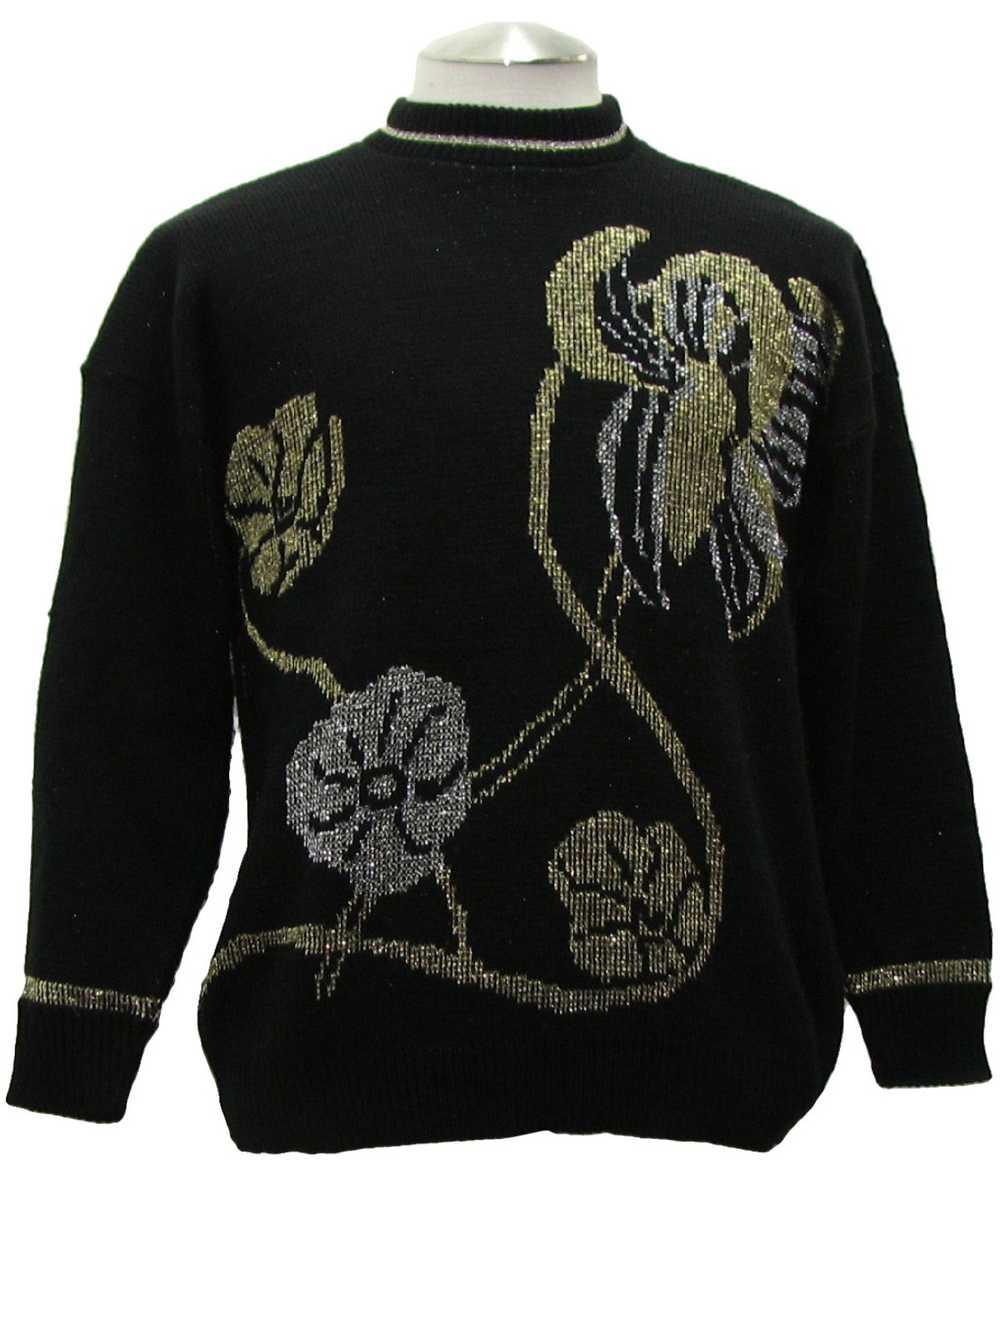 1980's Womens Totally 80s Sweater - image 1